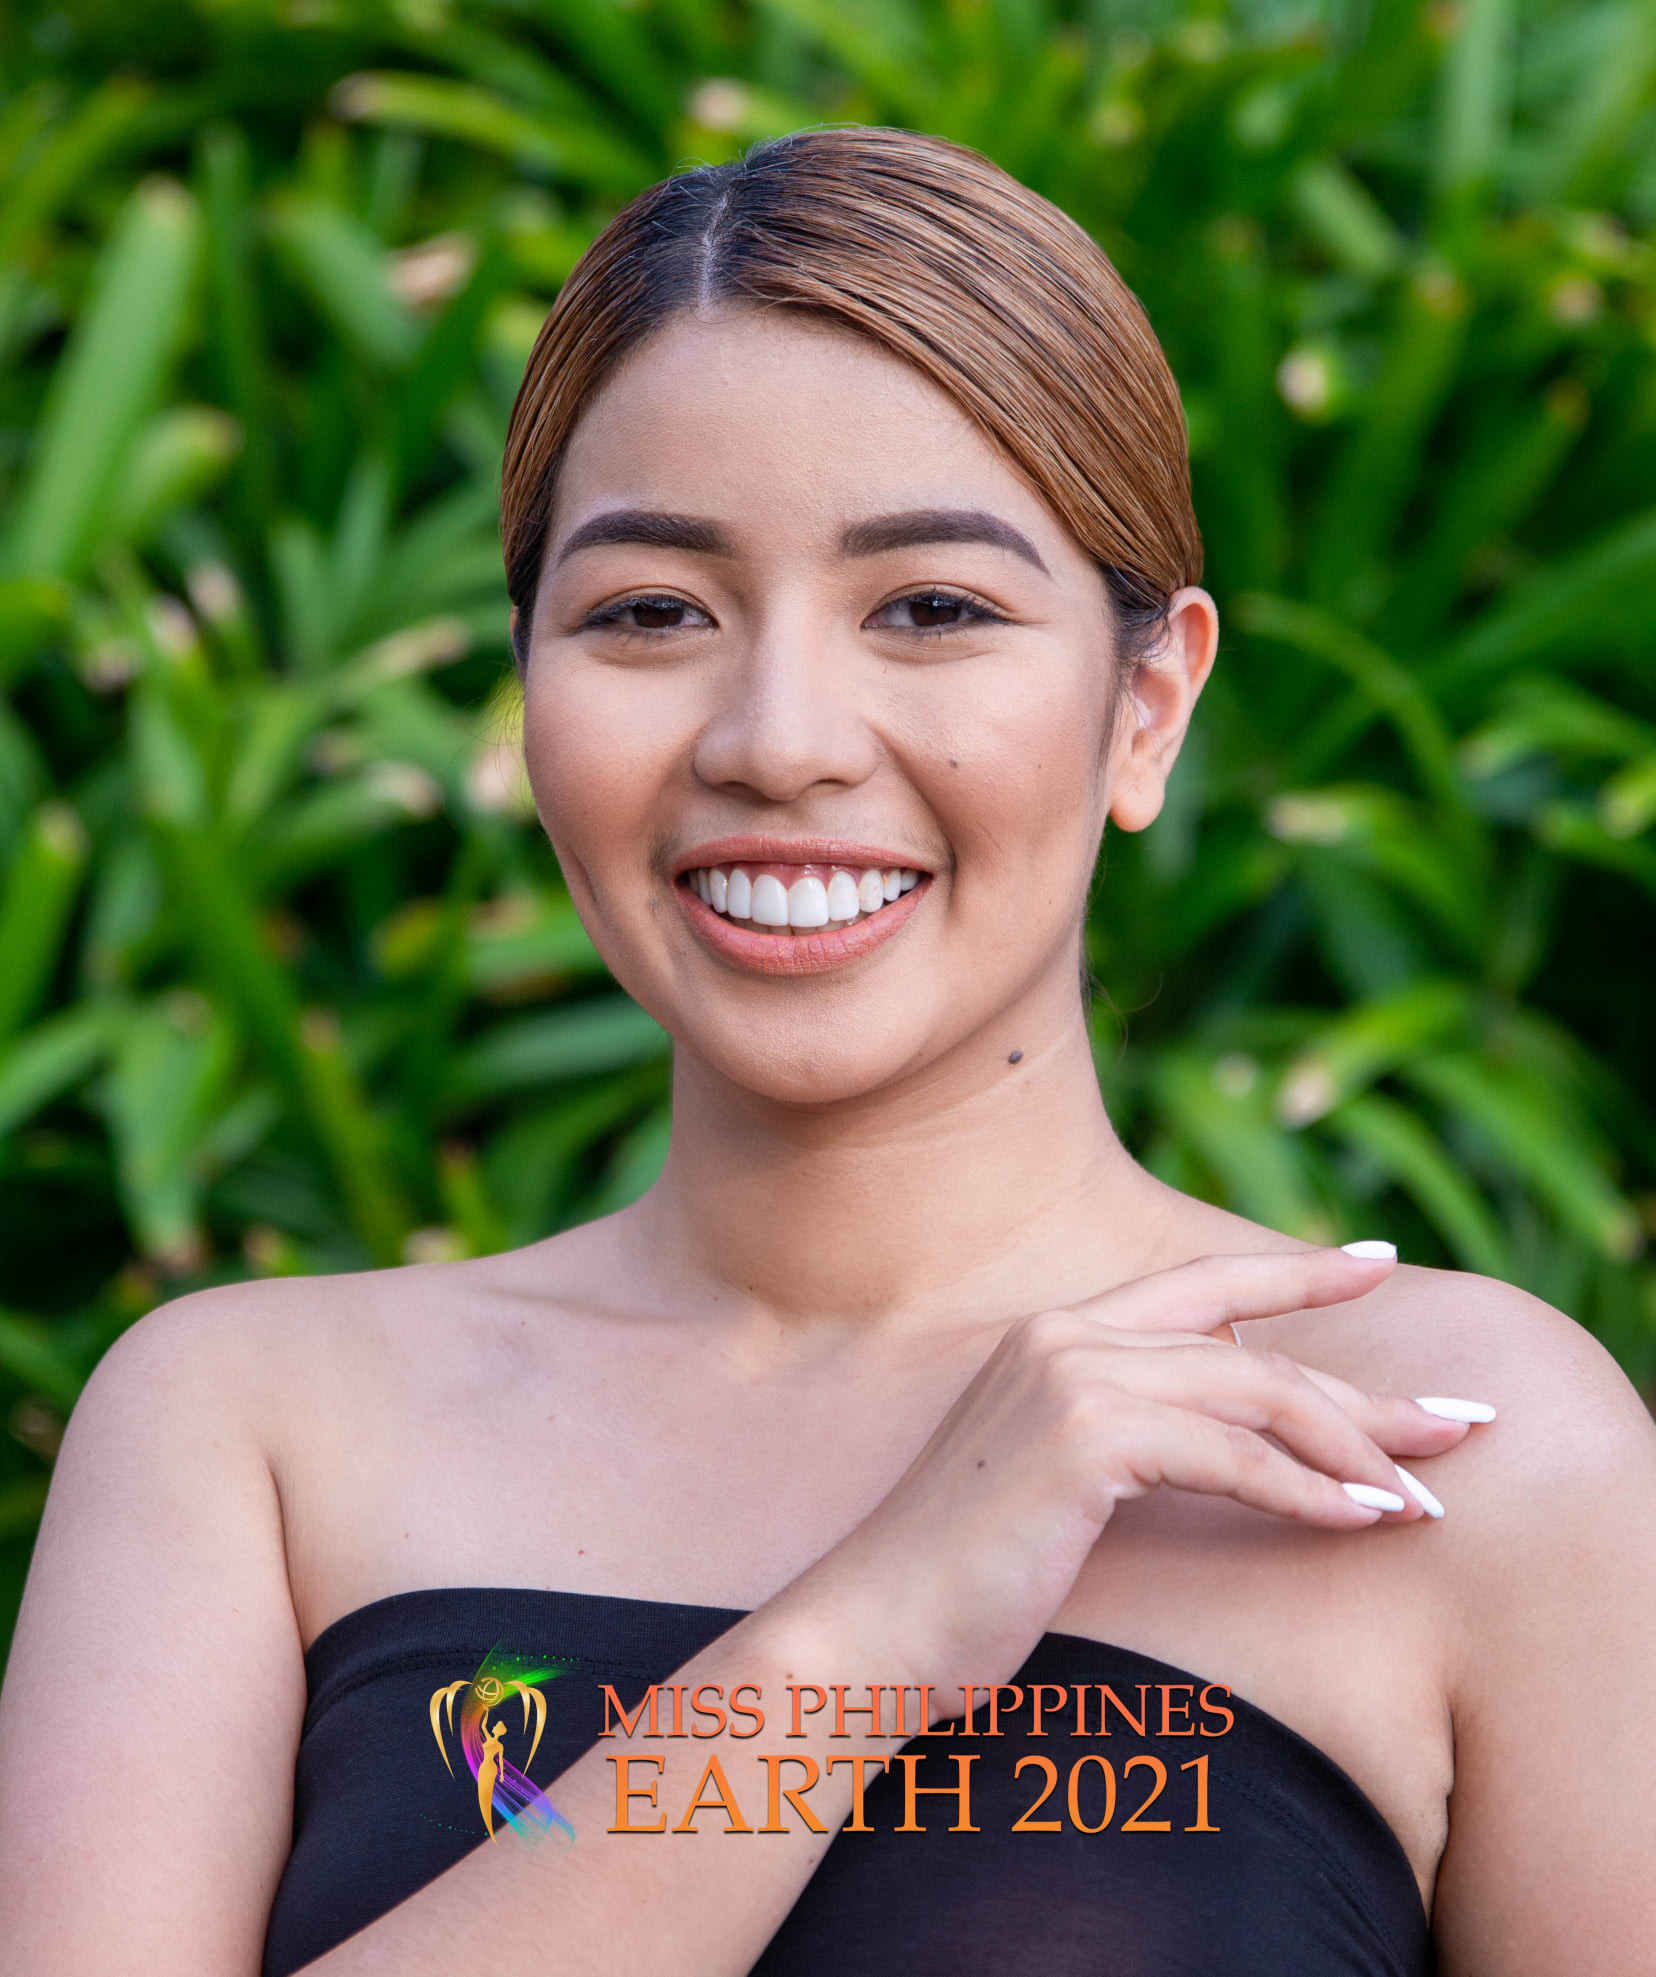 candidatas a miss earth philippines 2021. final: 8 agosto. - Página 12 OIZZwQ